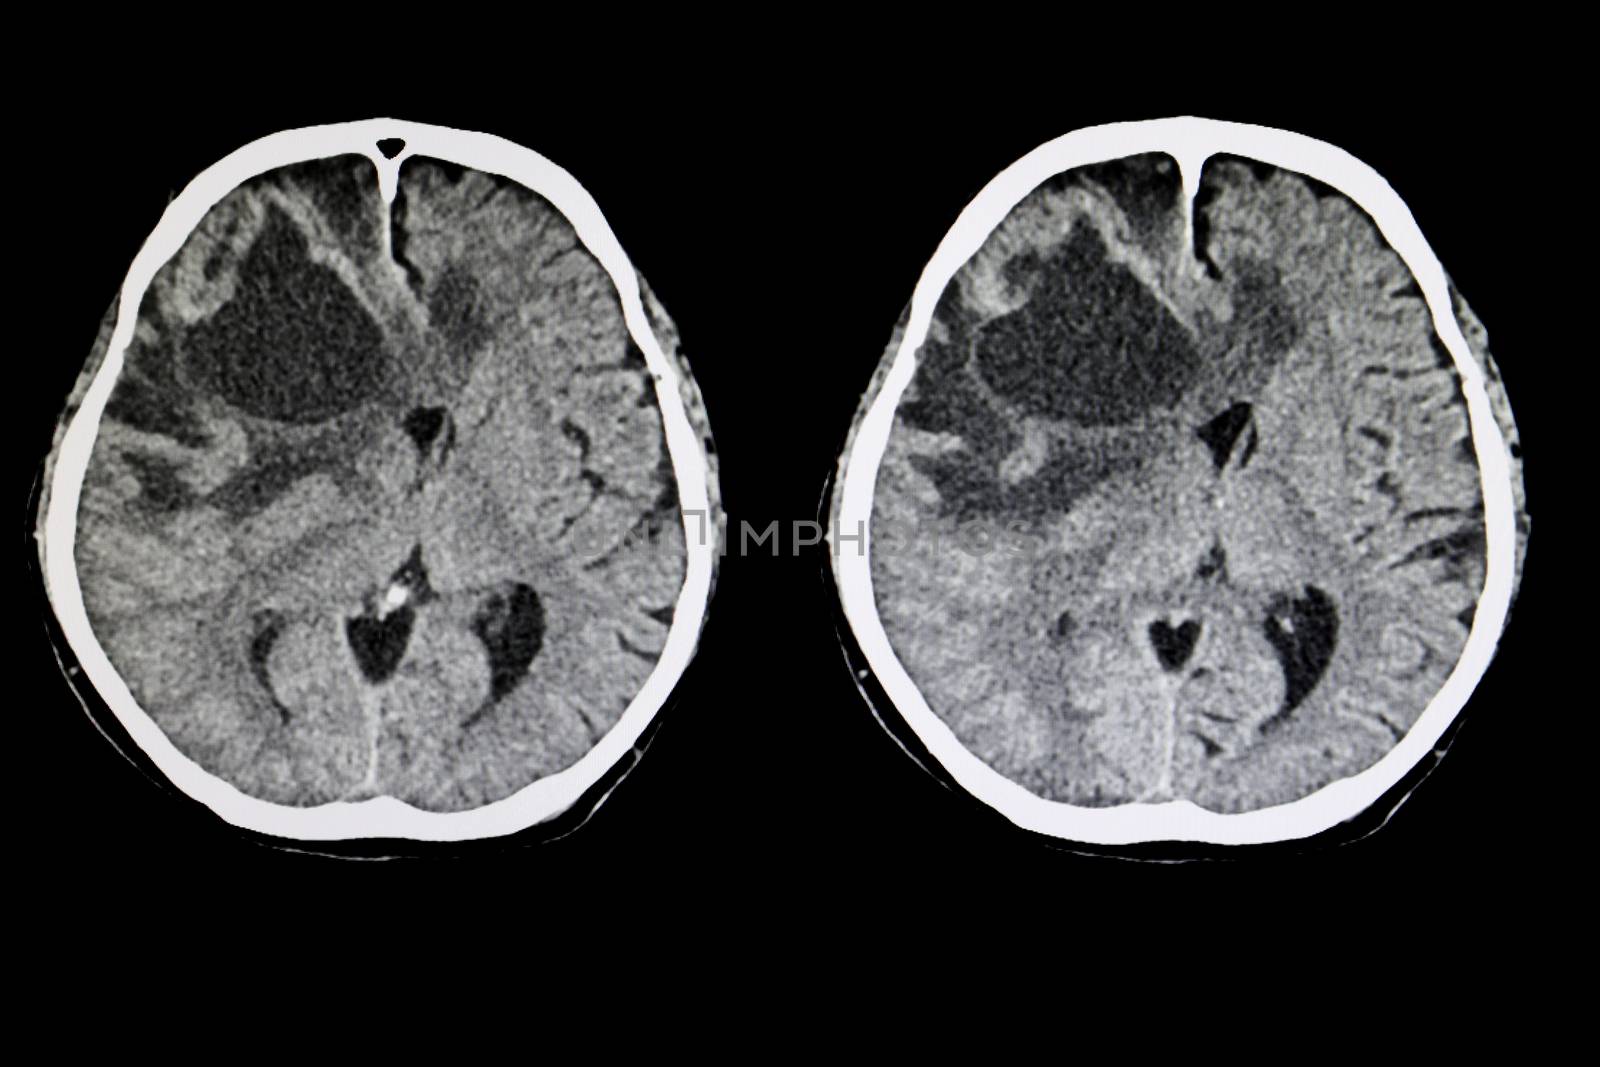 CT scan of a brain of a patient with a large metastatic tumor with cerebral edema.